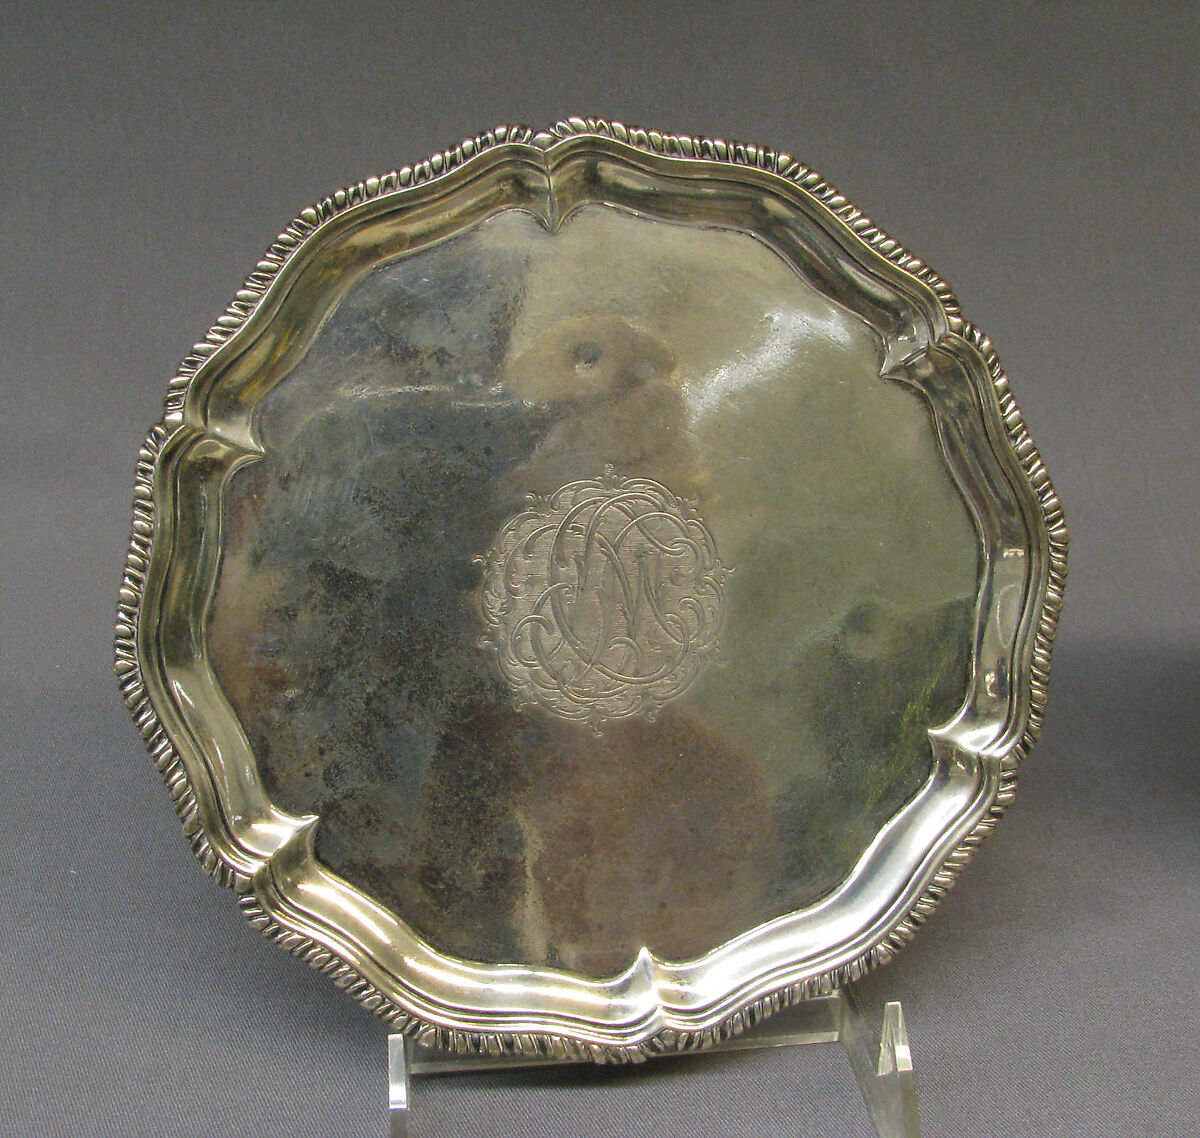 Salver (one of a pair), Probably by Thomas Hannam, Silver, British, London 